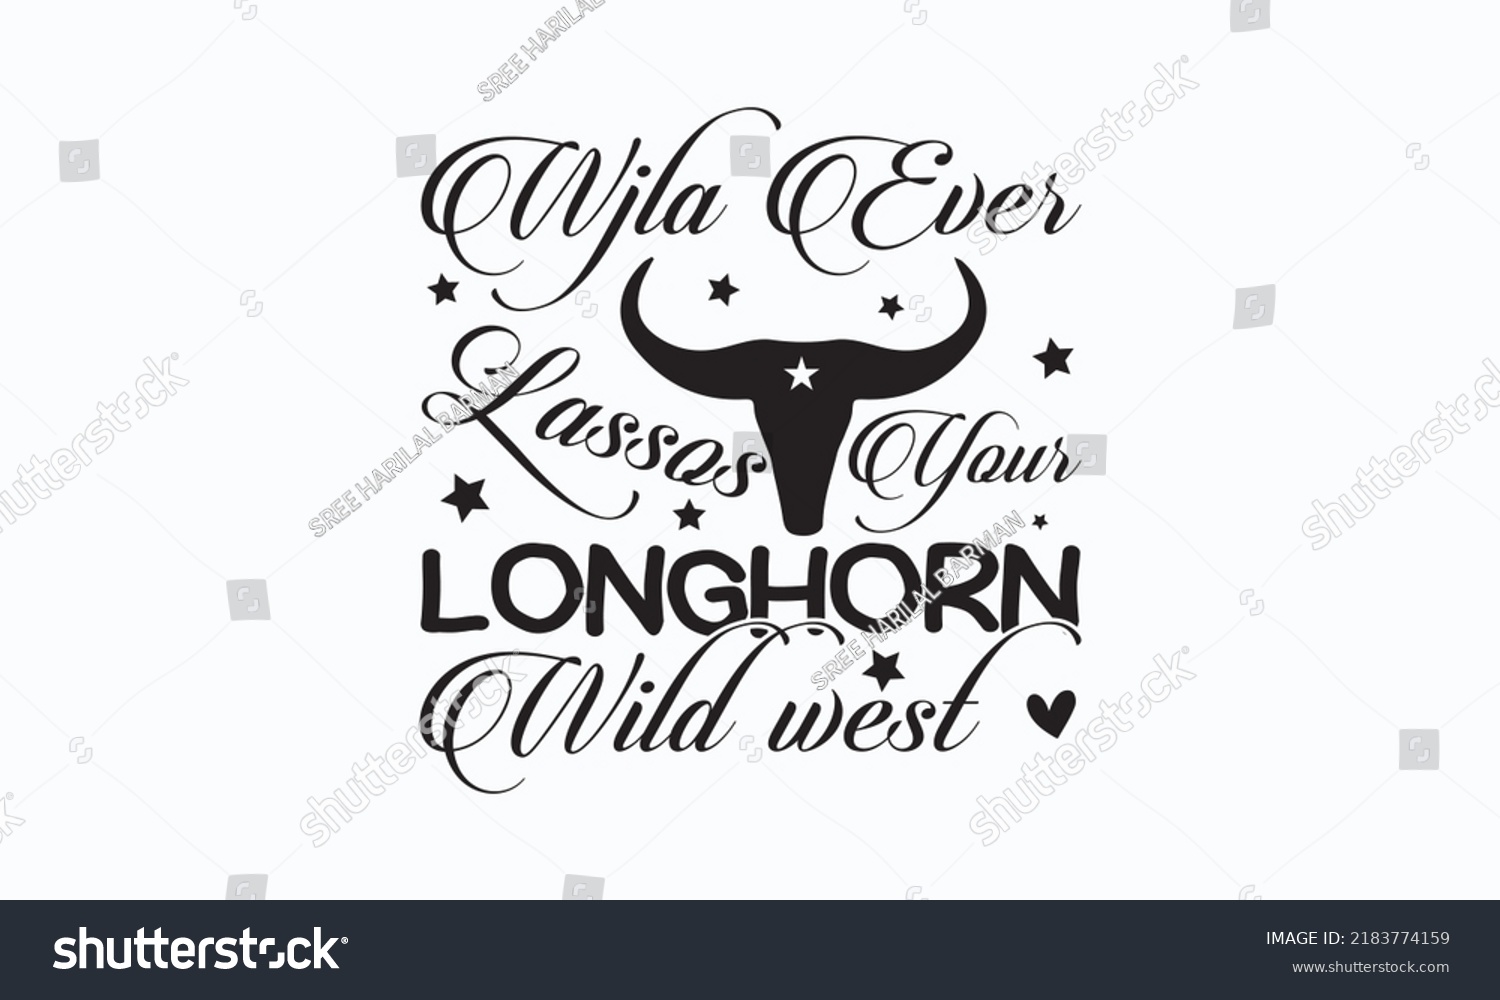 SVG of Wjla Ever lassos your longhorn wild west - Sublimation SVG t-shirt design, Vector vintage illustration?  Good for scrapbooking, posters, templet,  greeting cards, banners, textiles, T-shirts, gifts, a svg